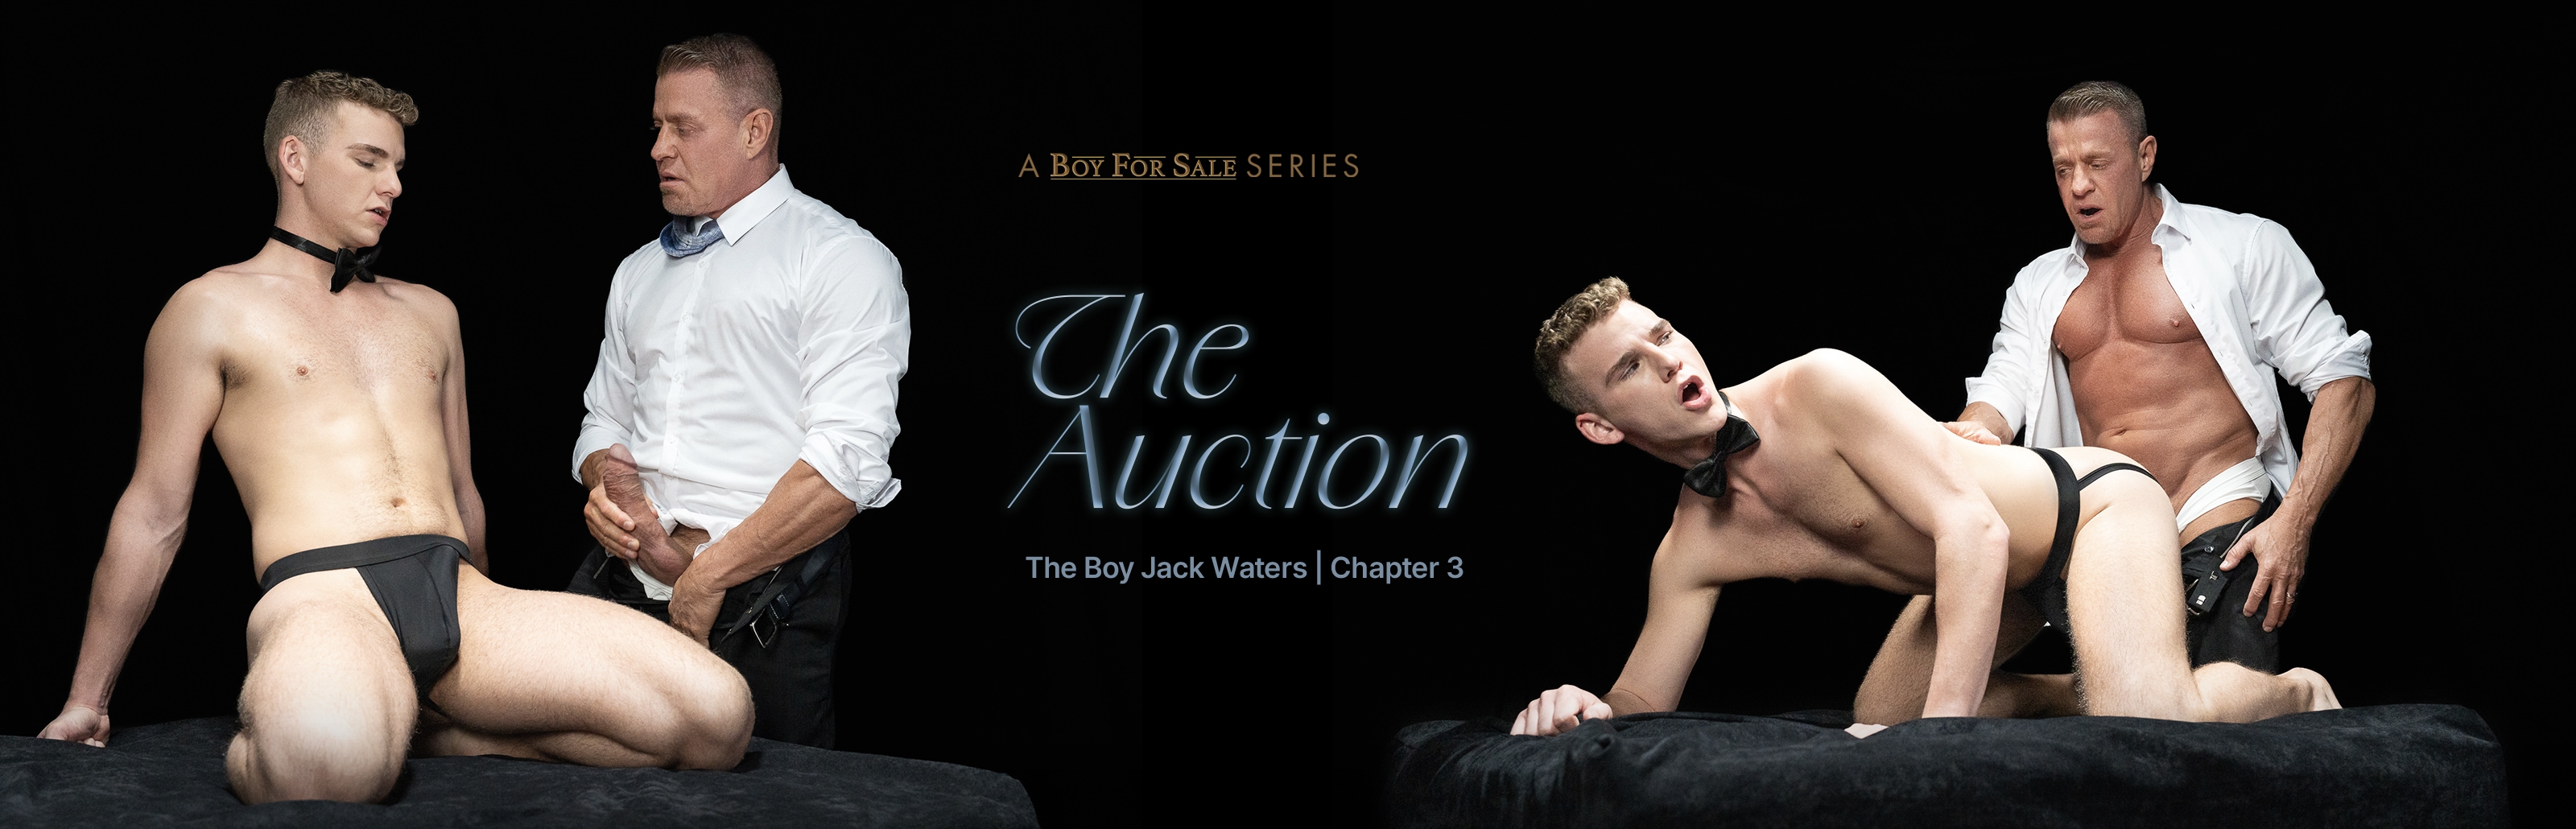 The Auction | THE BOY JACK WATERS | Chapter 3 Photos 97